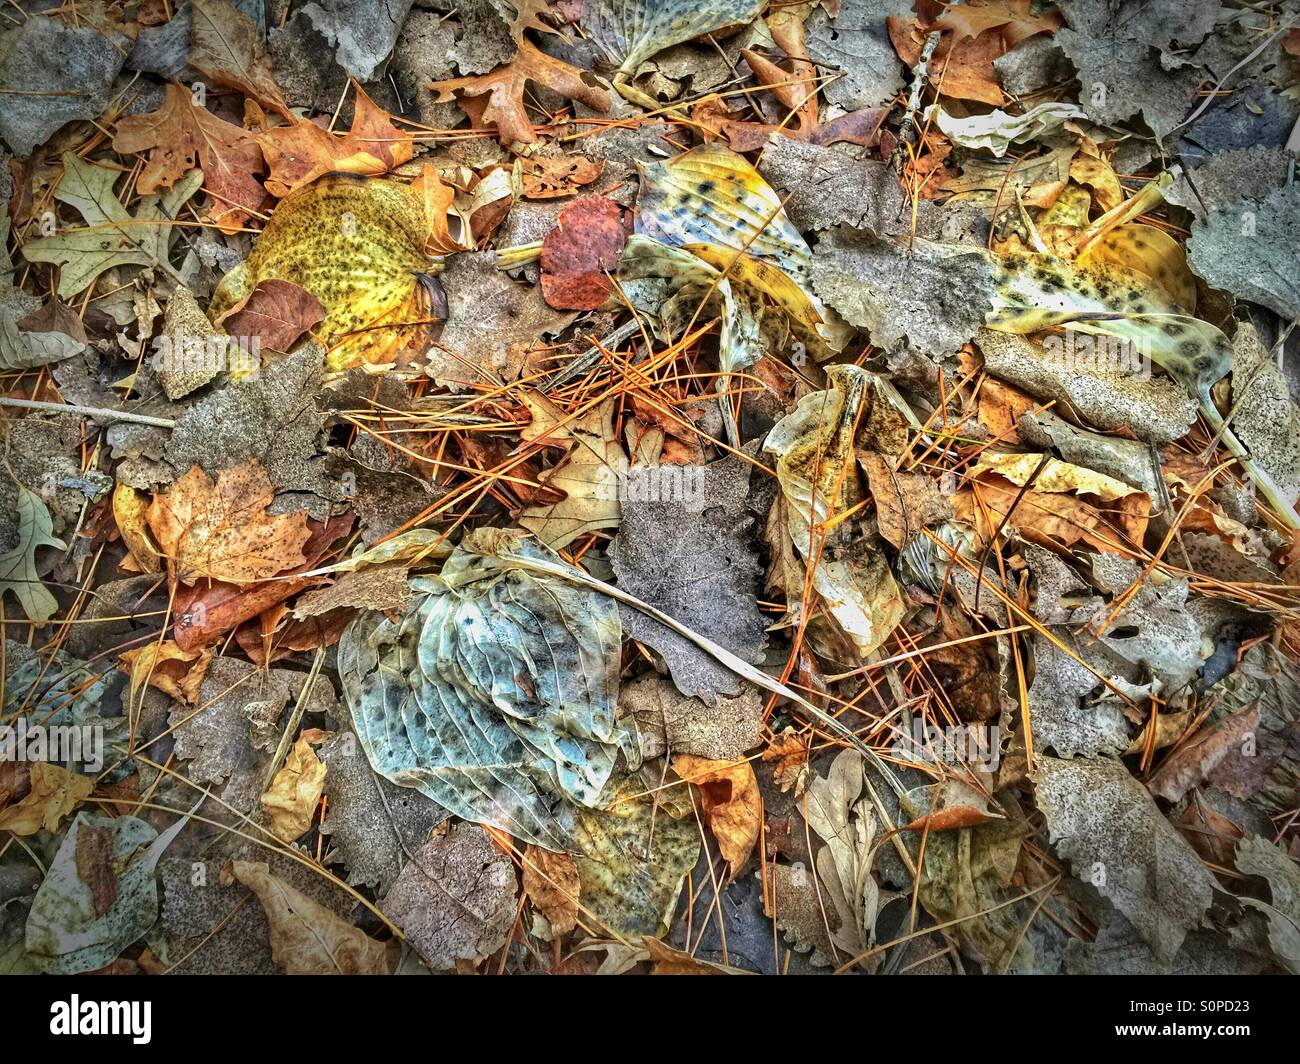 Dead and decaying leaves in winter Stock Photo